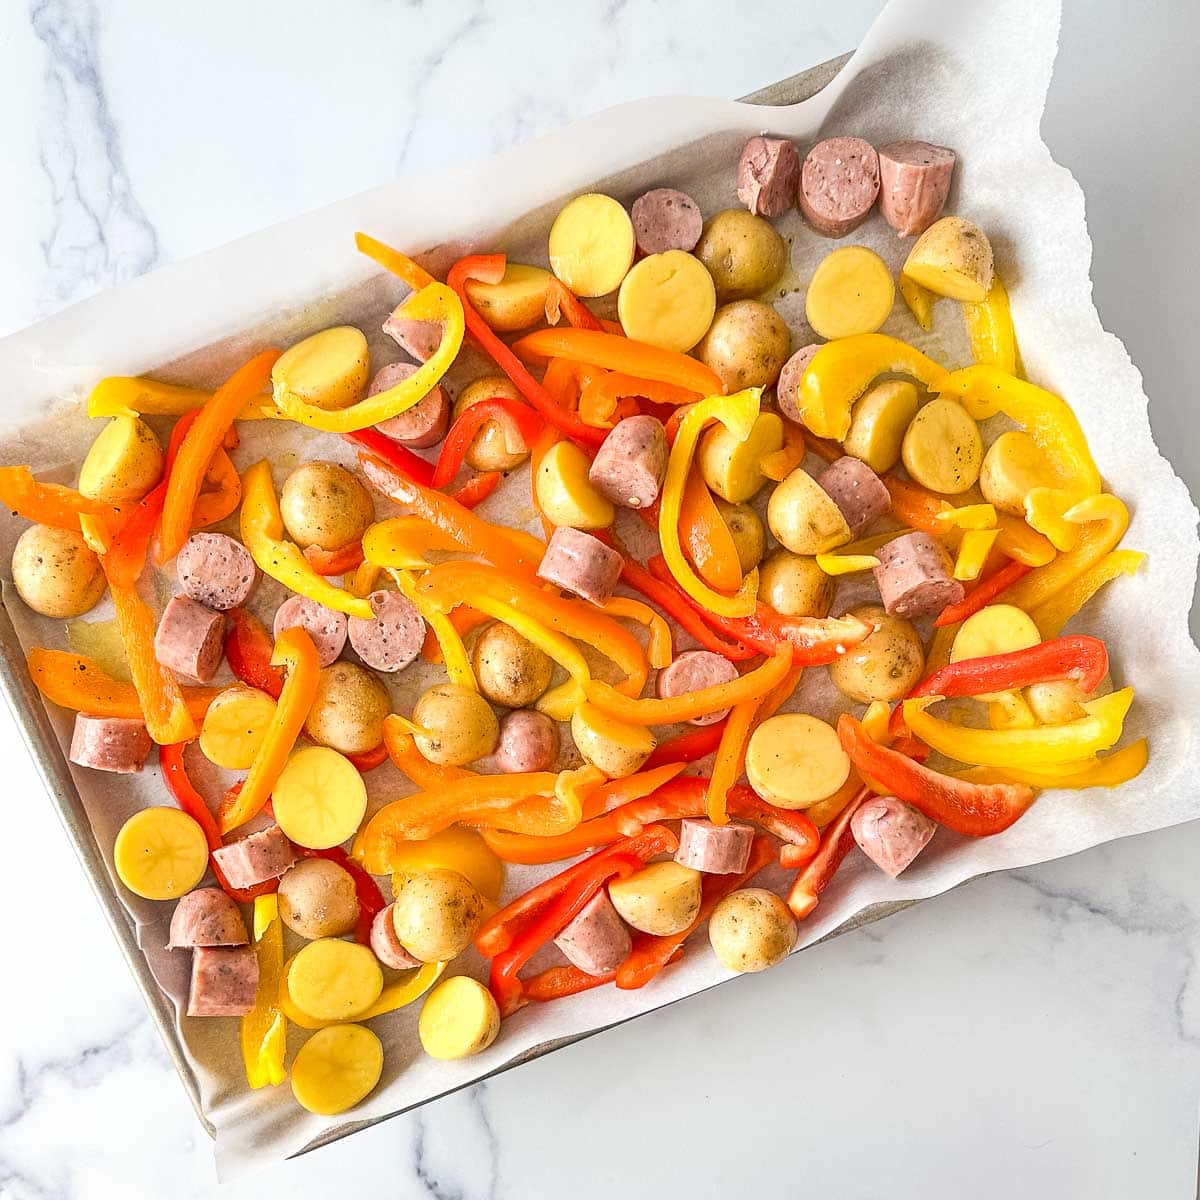 A baking sheet filled with peppers, potatoes, and sliced chicken sausages.